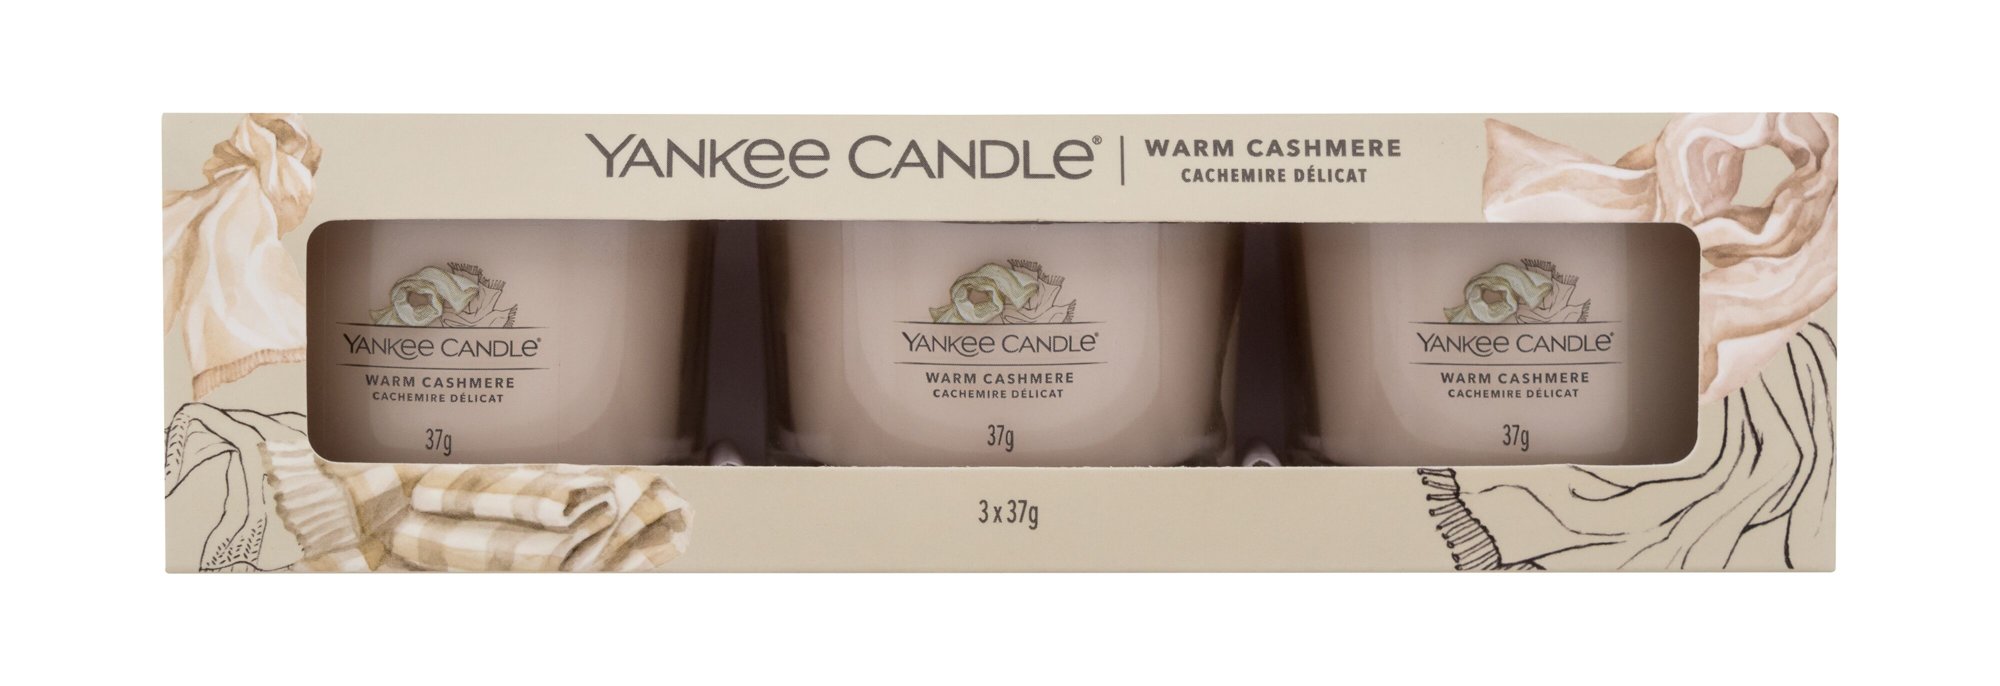 Yankee Candle Warm Cashmere 37g Scented Candle 3 x 37 g Kvepalai Unisex Scented Candle Rinkinys